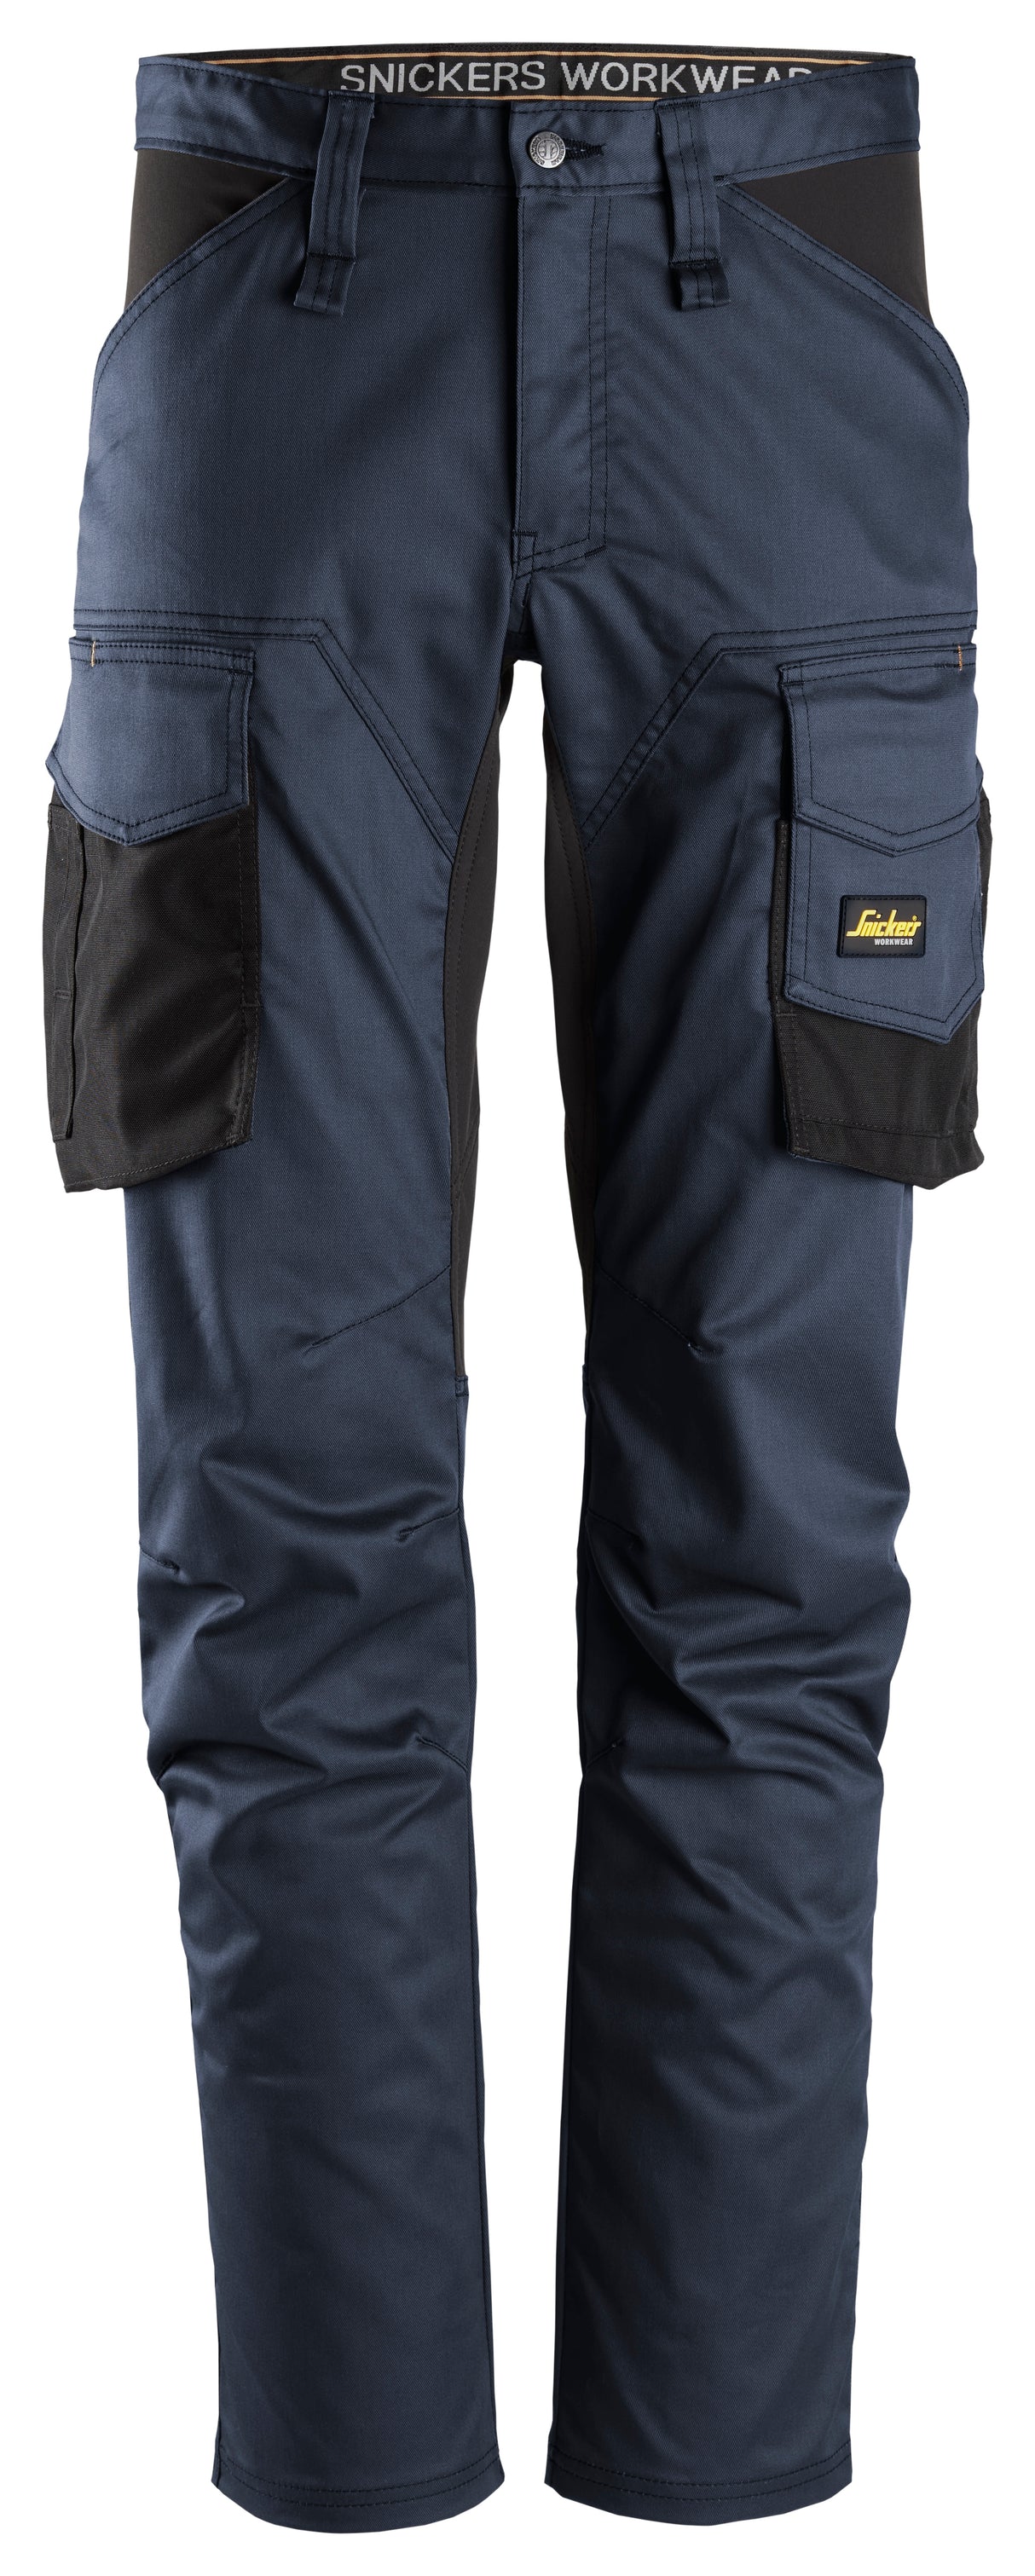 Snickers 6803 Allroundwork Stretch Trouser Navy\Black